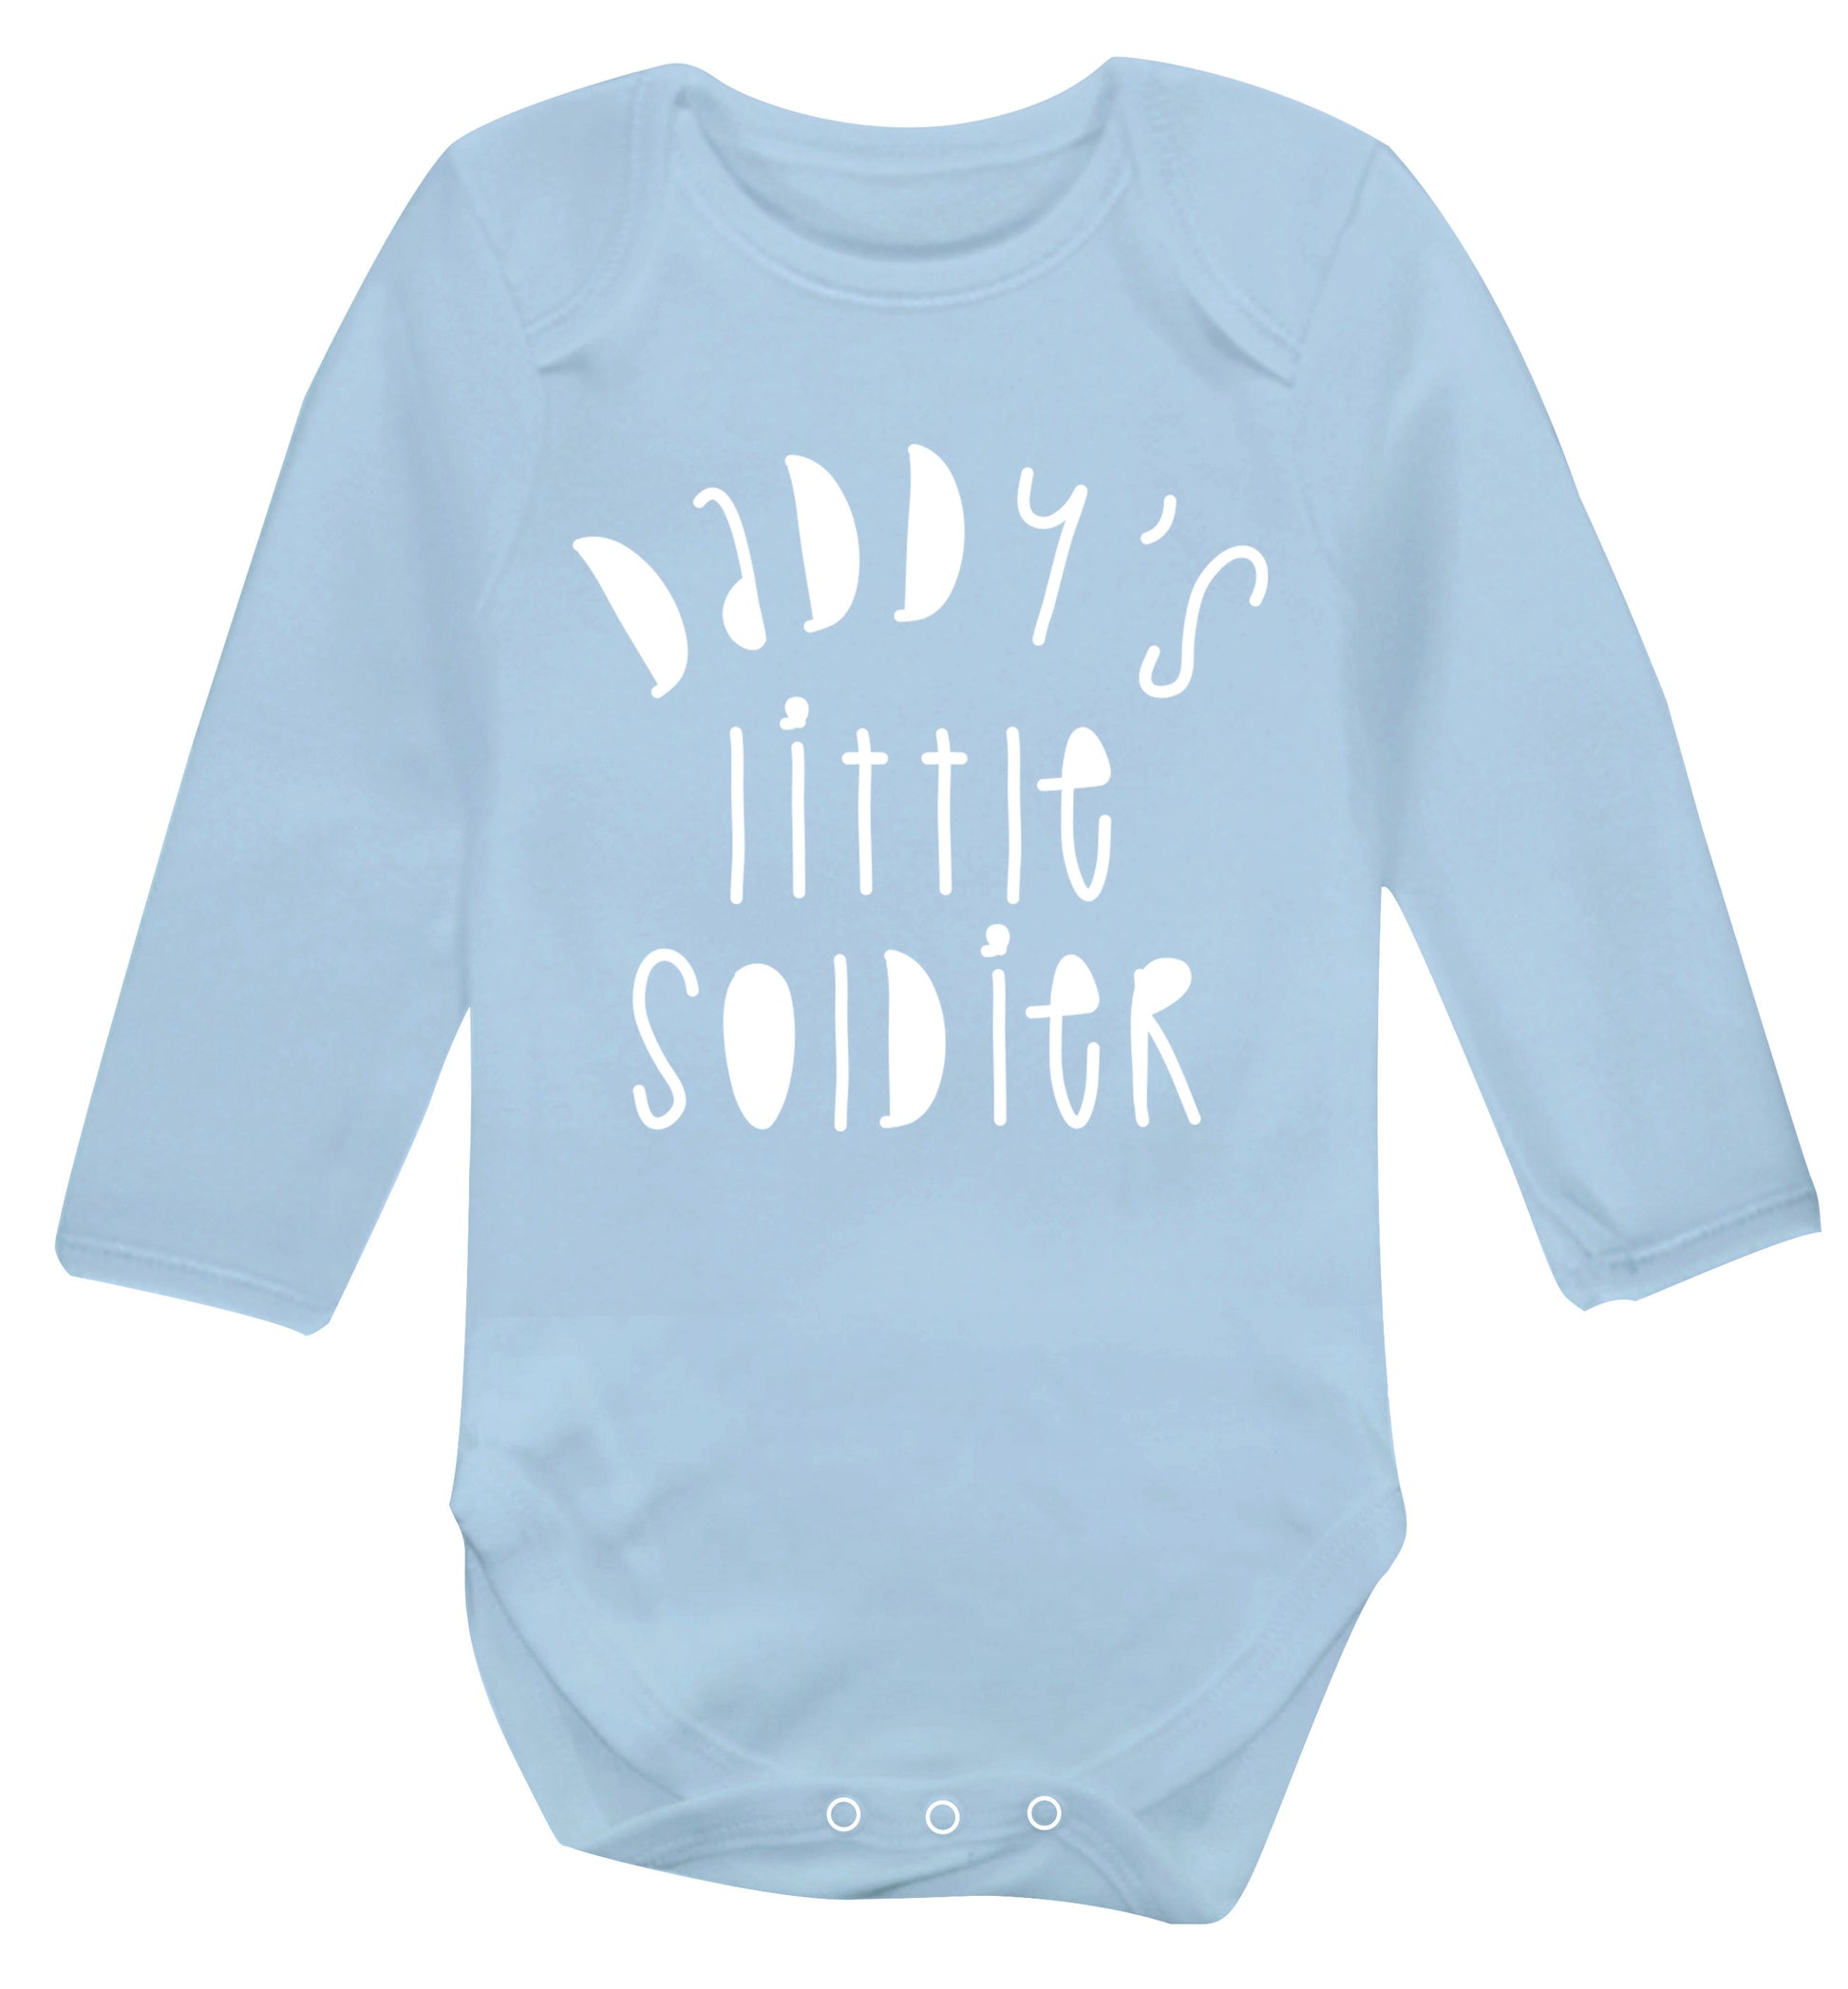 Daddy's little soldier Baby Vest long sleeved pale blue 6-12 months